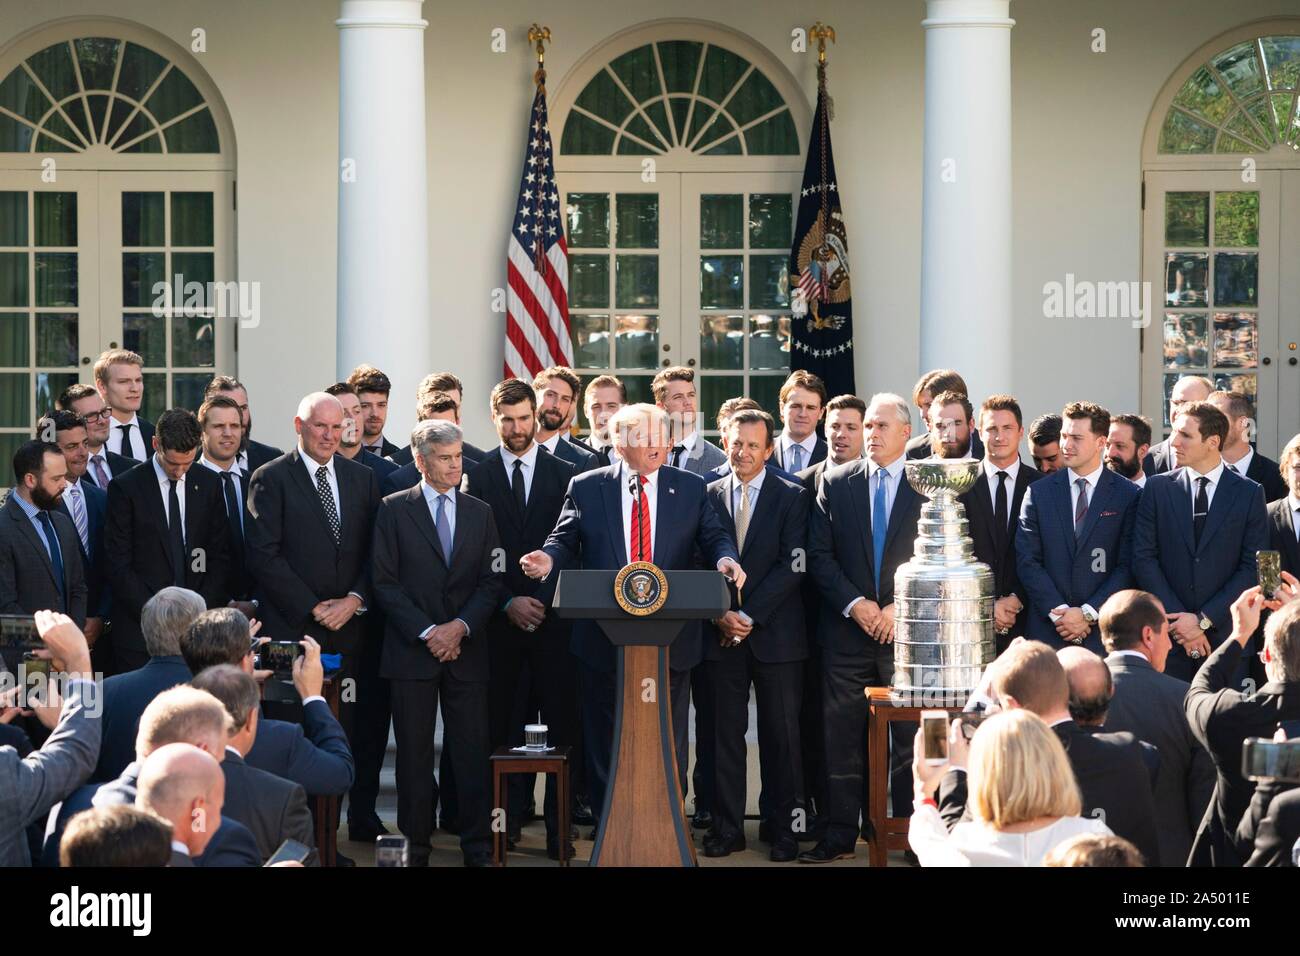 U.S President Donald Trump, center, during a ceremony welcoming the 2019 Stanley Cup Championship professional ice hockey team, the St. Louis Blues, in the Rose Garden of the White House October 15, 2019 in Washington, DC. Stock Photo